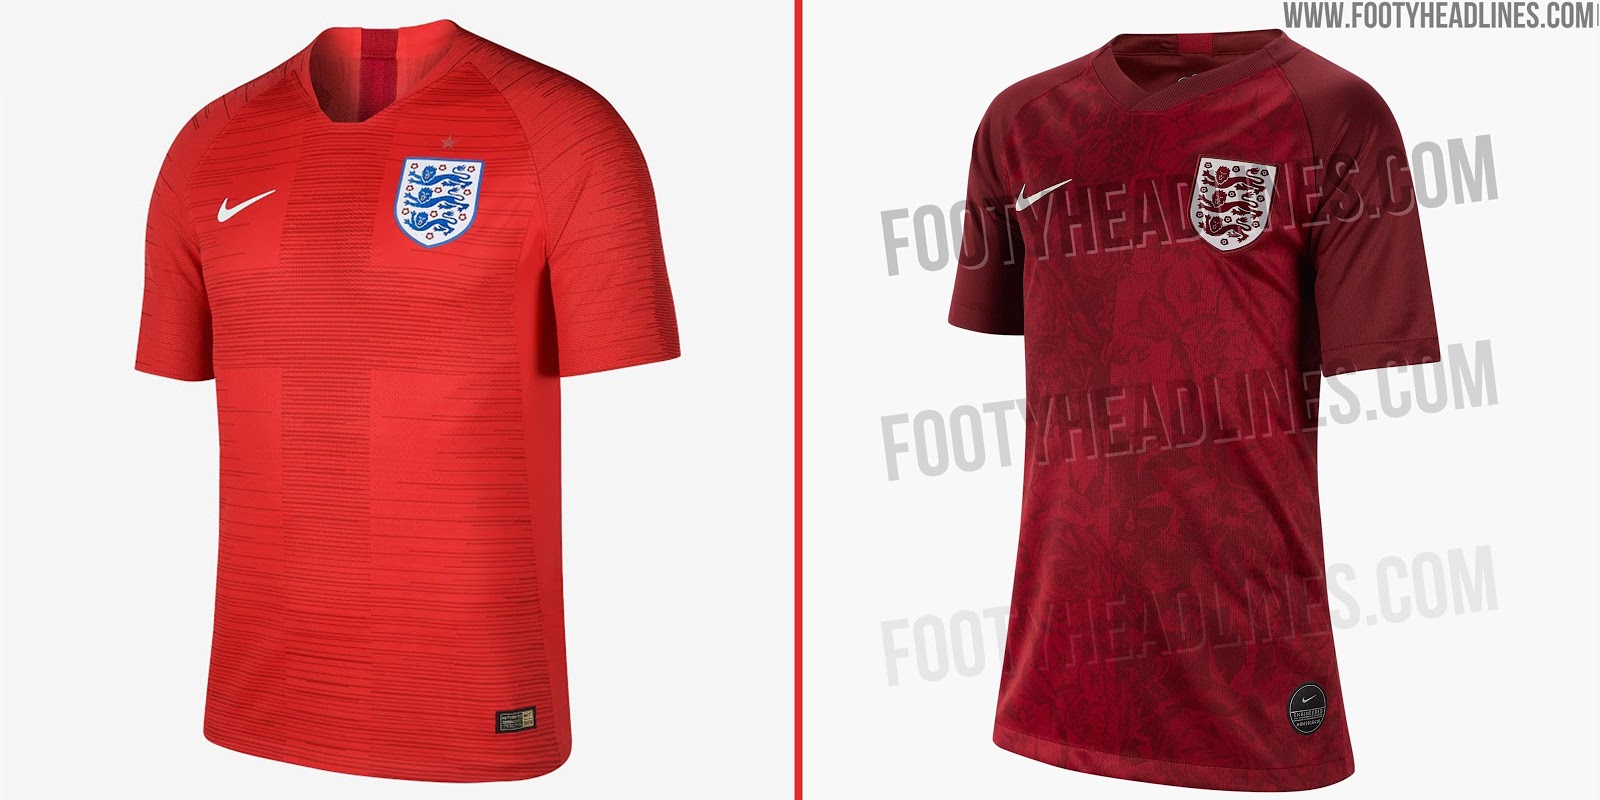 England Womens Football Kit 2019  England Rugby World Cup 2019 Home